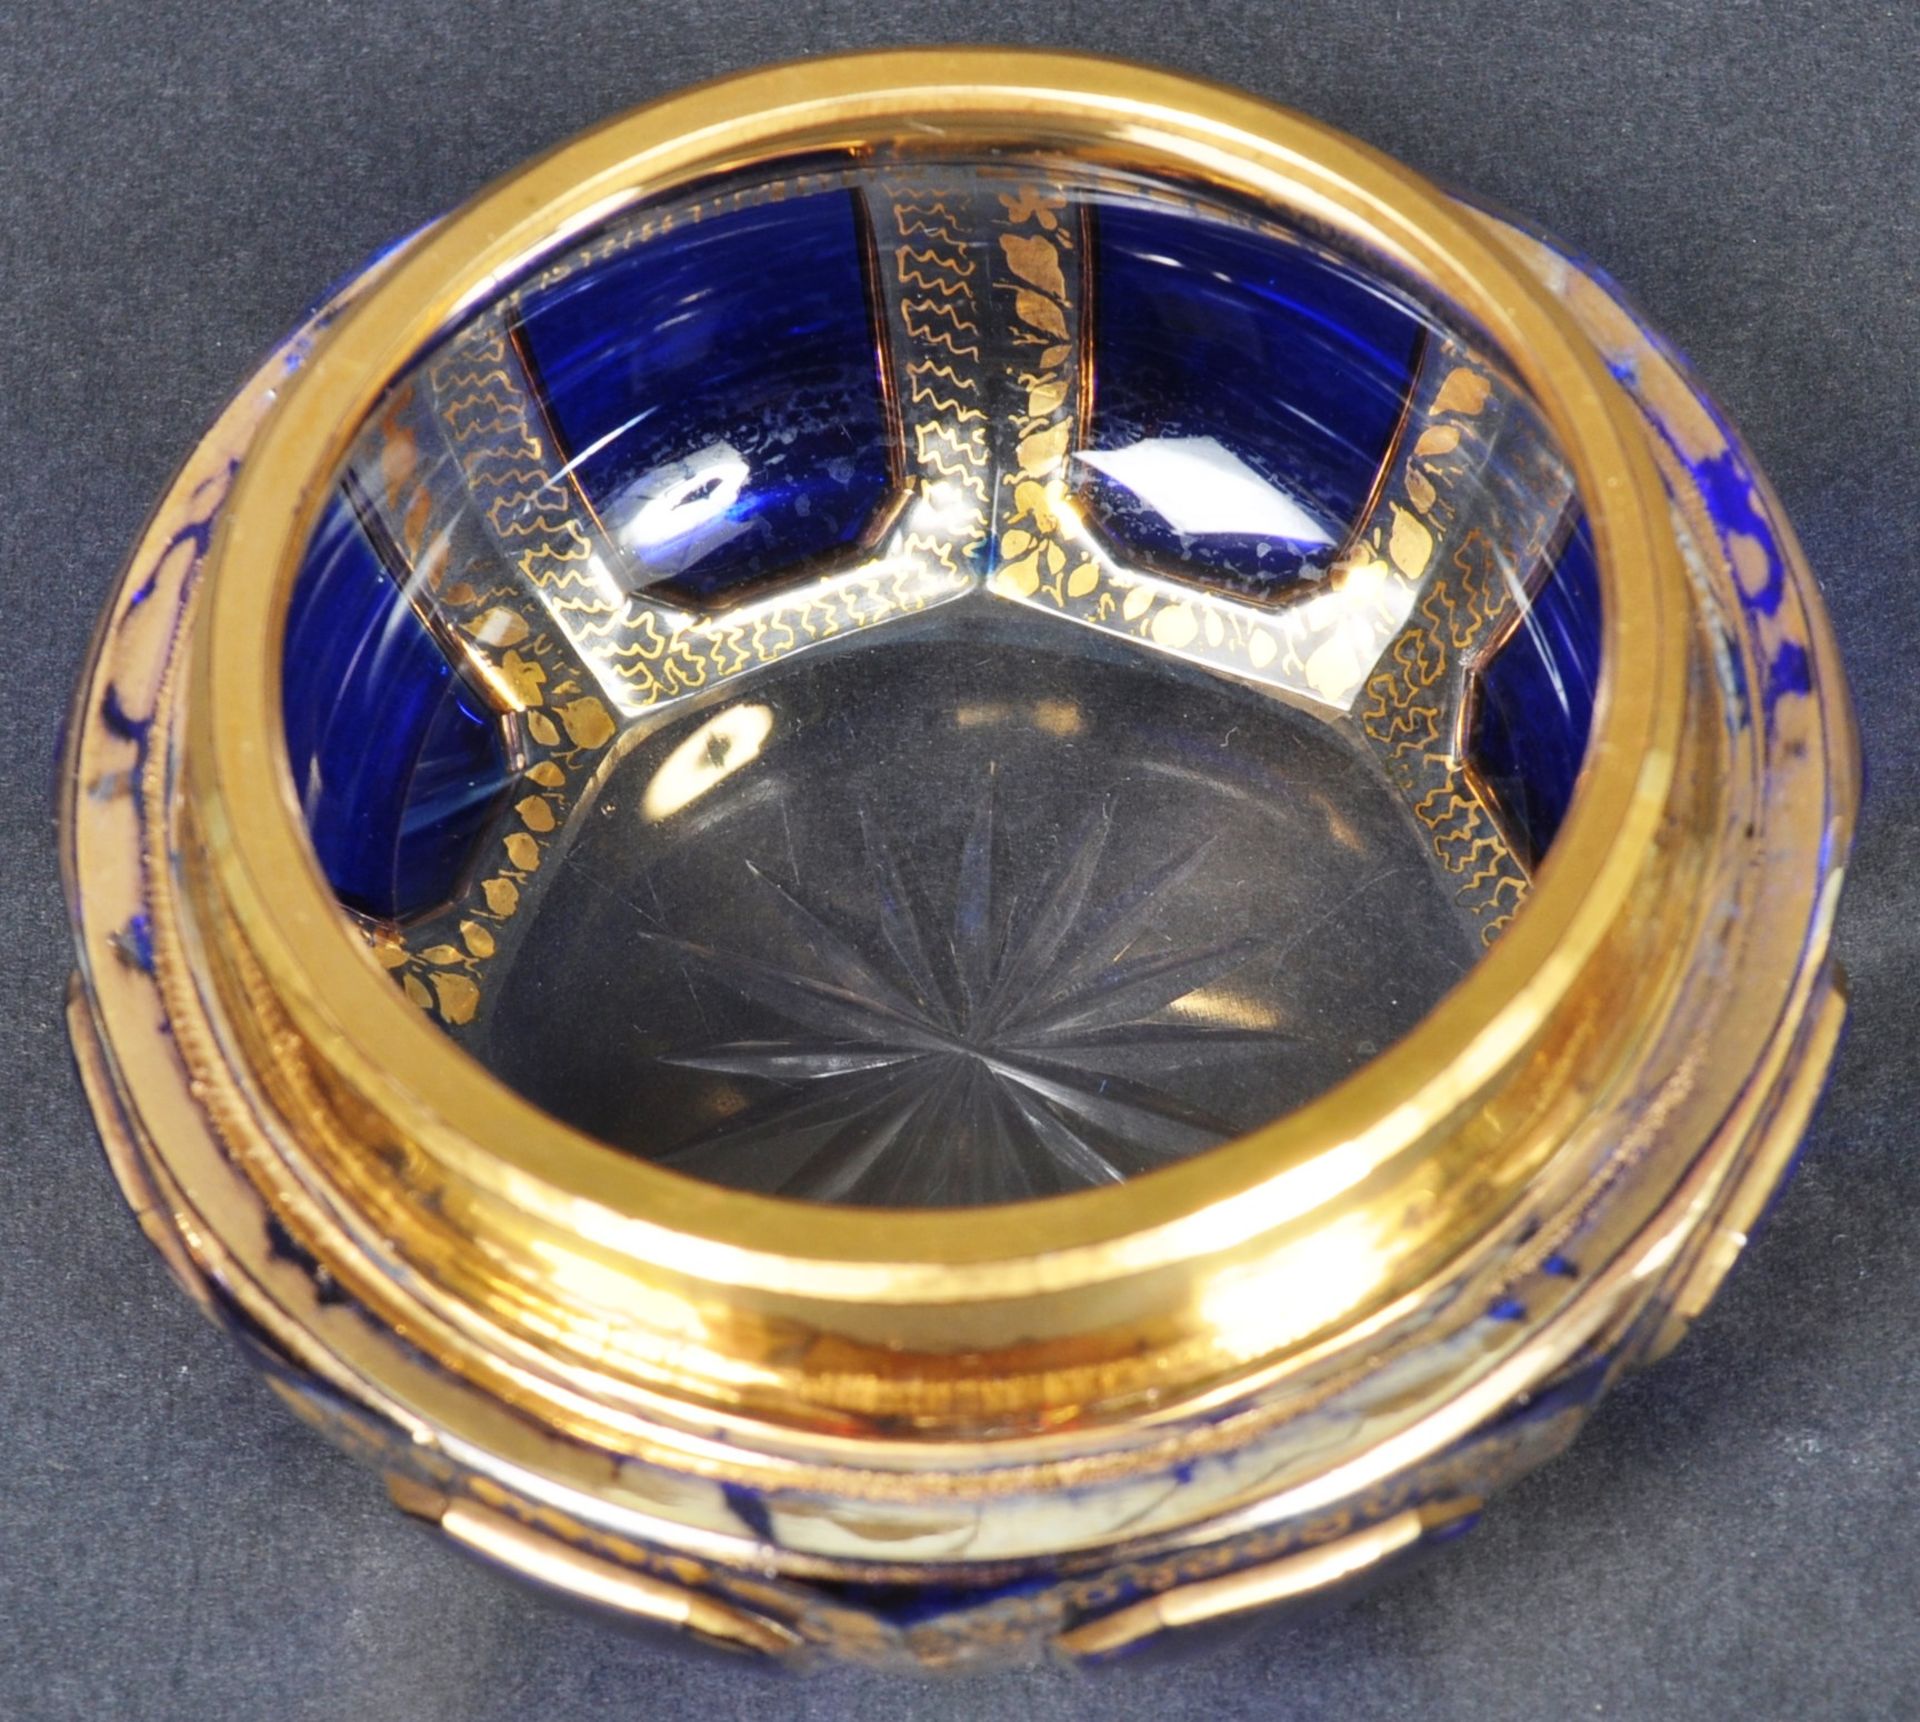 PAIR OF 19TH CENTURY MOSER GLASS TRINKET BOXES - Image 6 of 7